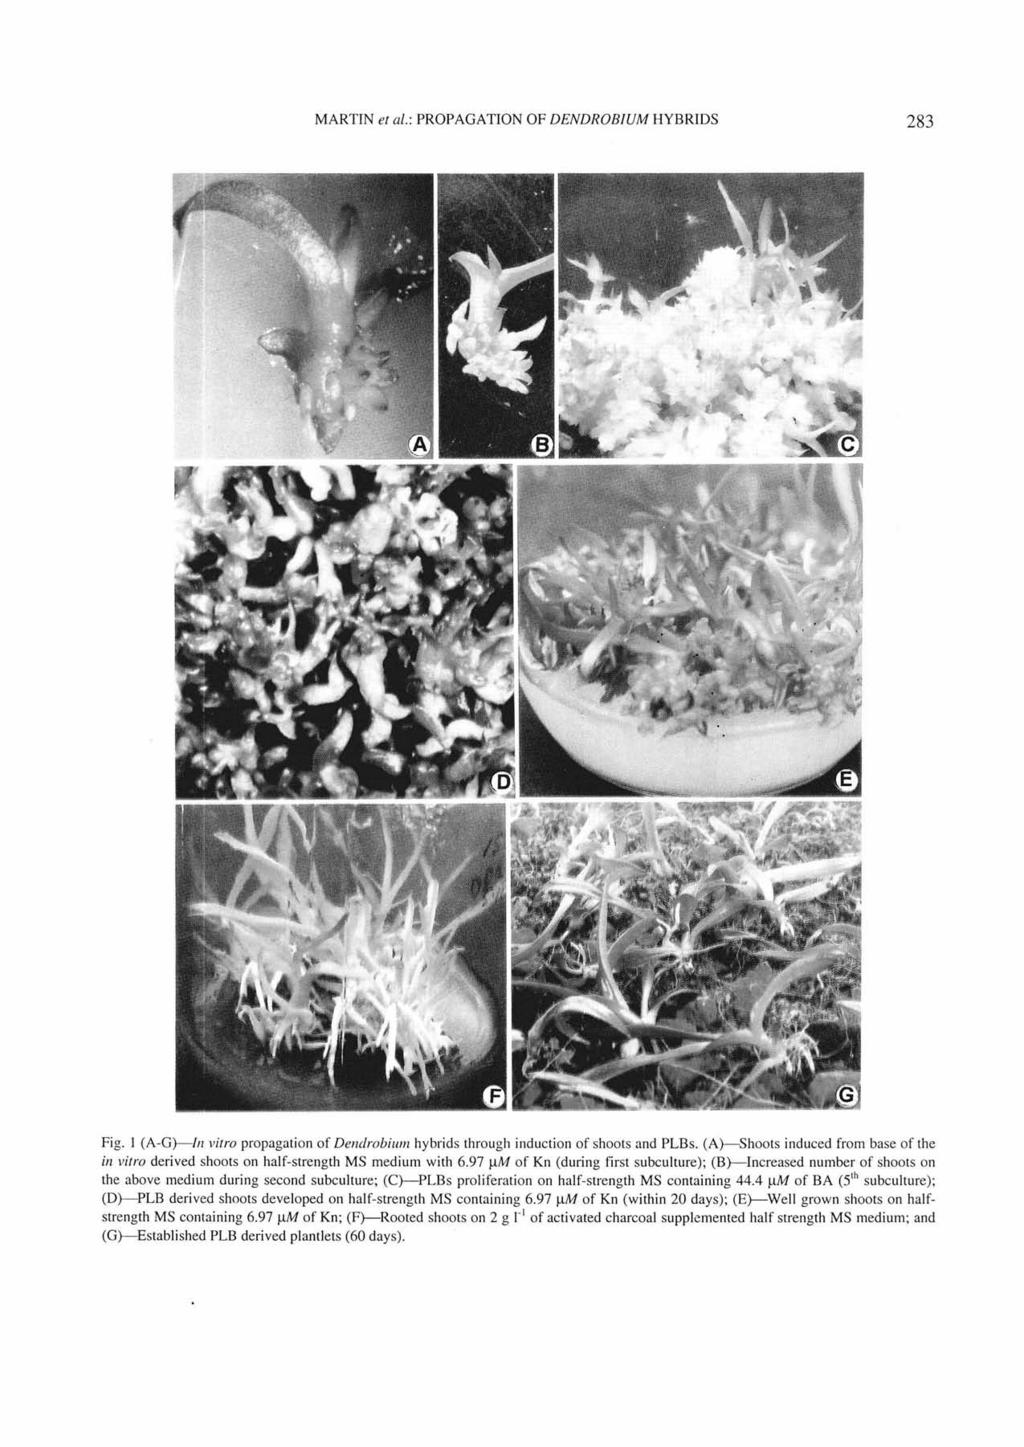 MARTINet al.: PROPAGATION OF DENDROBIUM HYBRIDS 283 Fig. 1 (A-G)---/11 vitro propagation of Dendrobiwn hybrids through induction of shoots and PLBs.